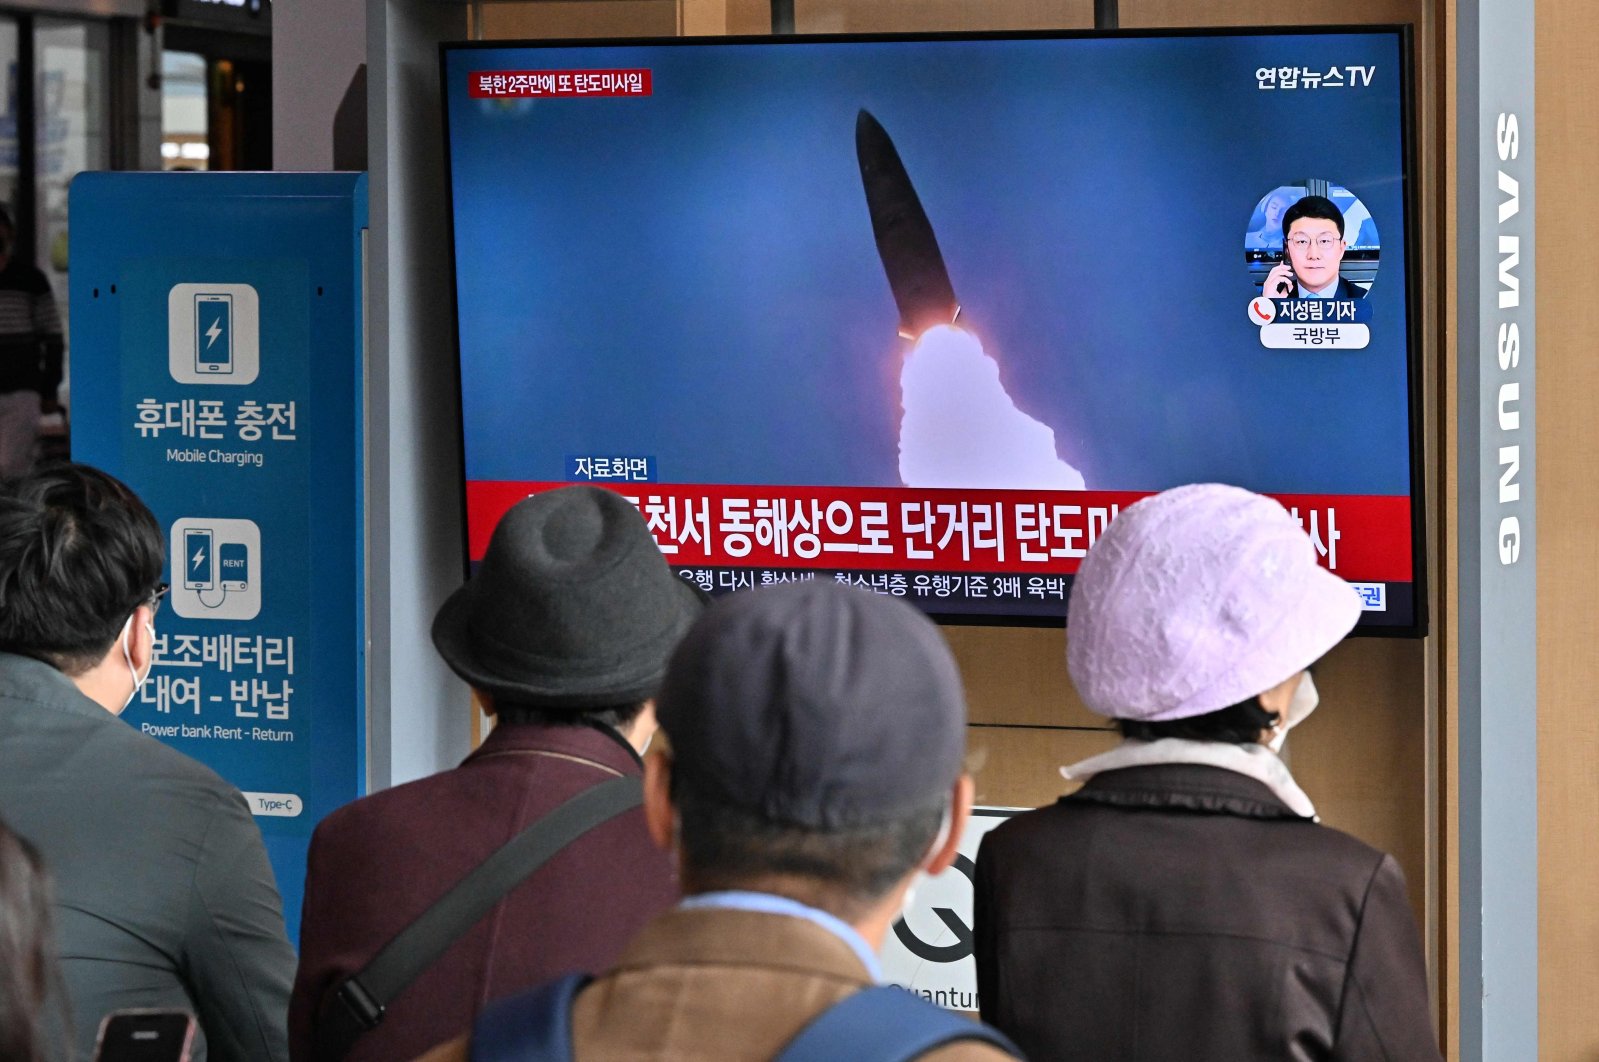 People watch a television screen showing a news broadcast with file footage of a North Korean missile test, at a railway station after North Korea fired two short-range ballistic missiles according to South Korea&#039;s military, Seoul, South Korea, Oct. 28, 2022. (AFP Photo)